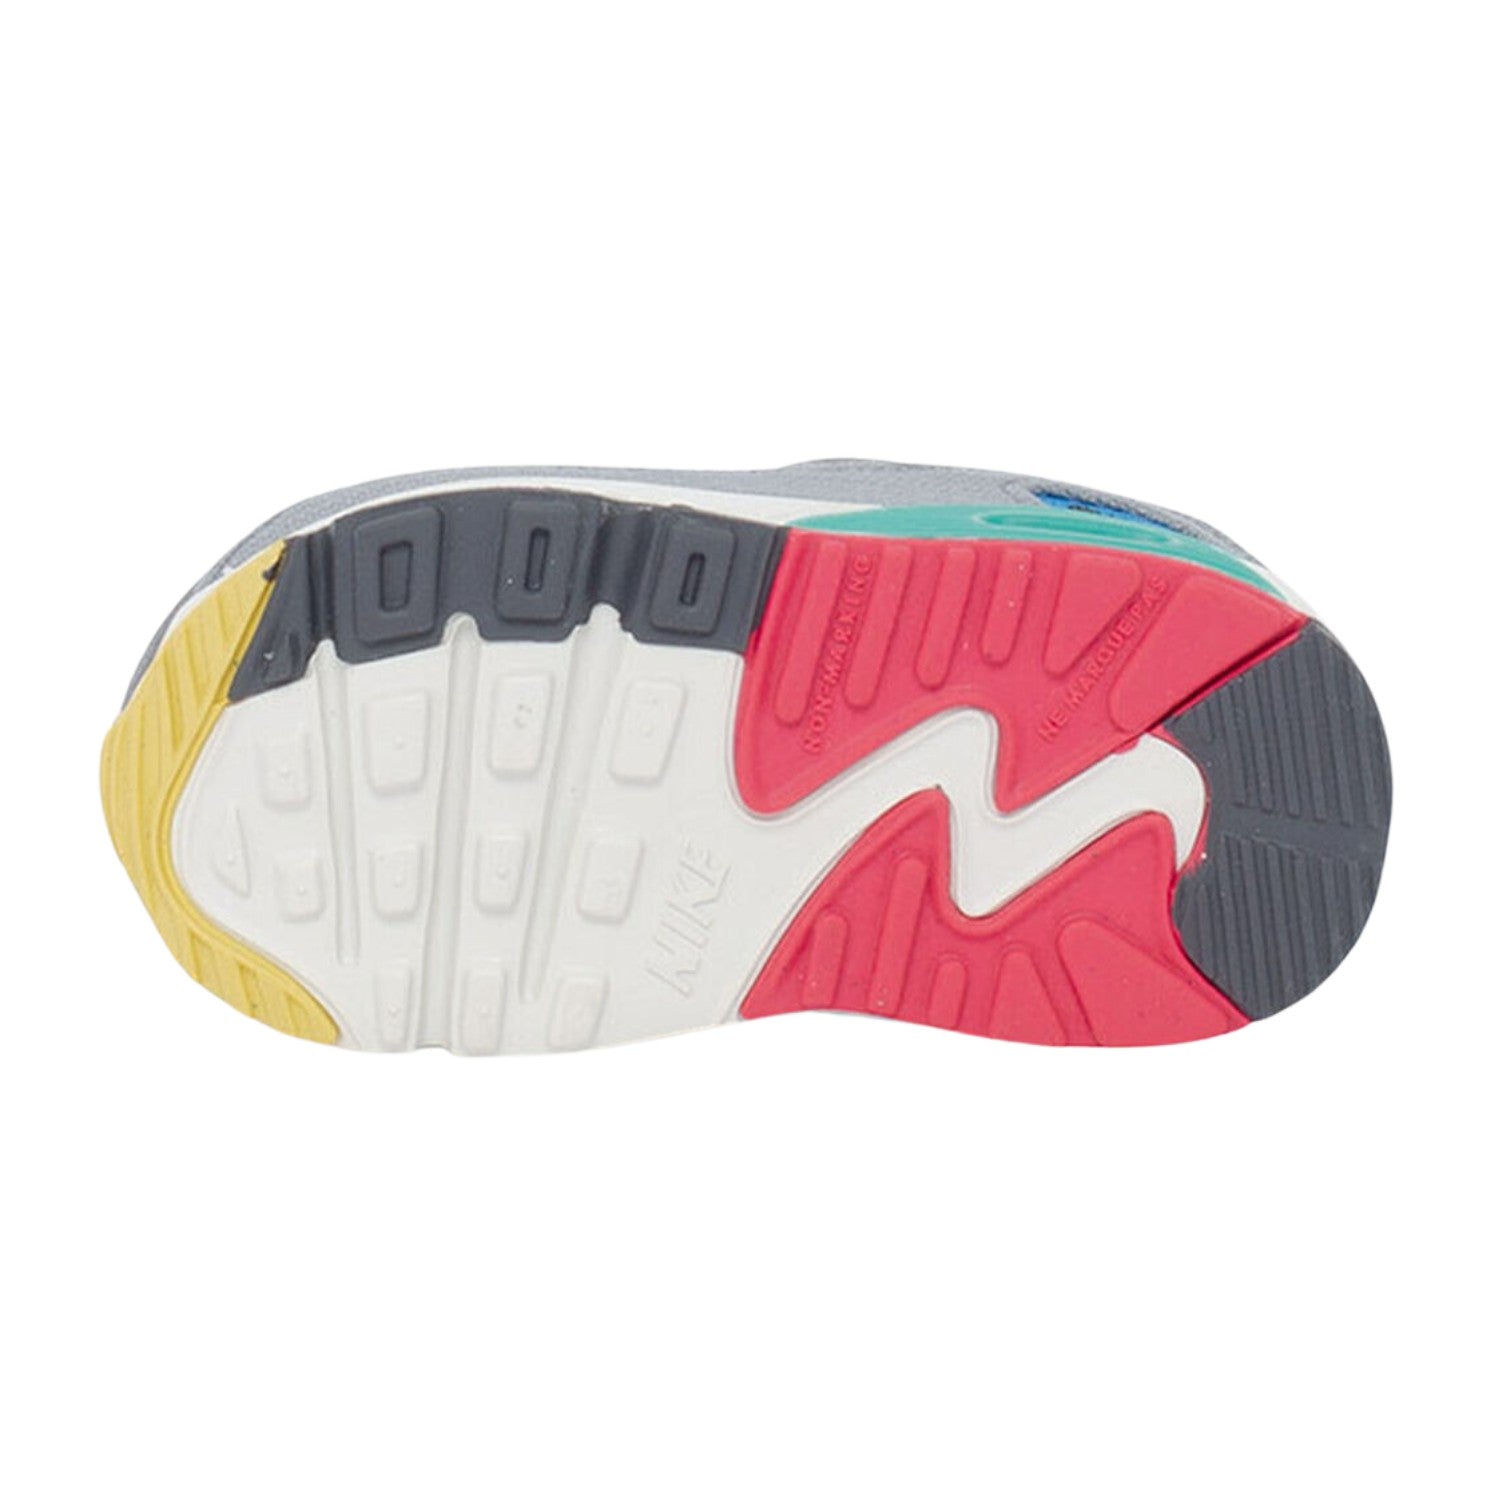 Nike Air Max 90 Ltr (Td) Toddlers Style : Dq7762